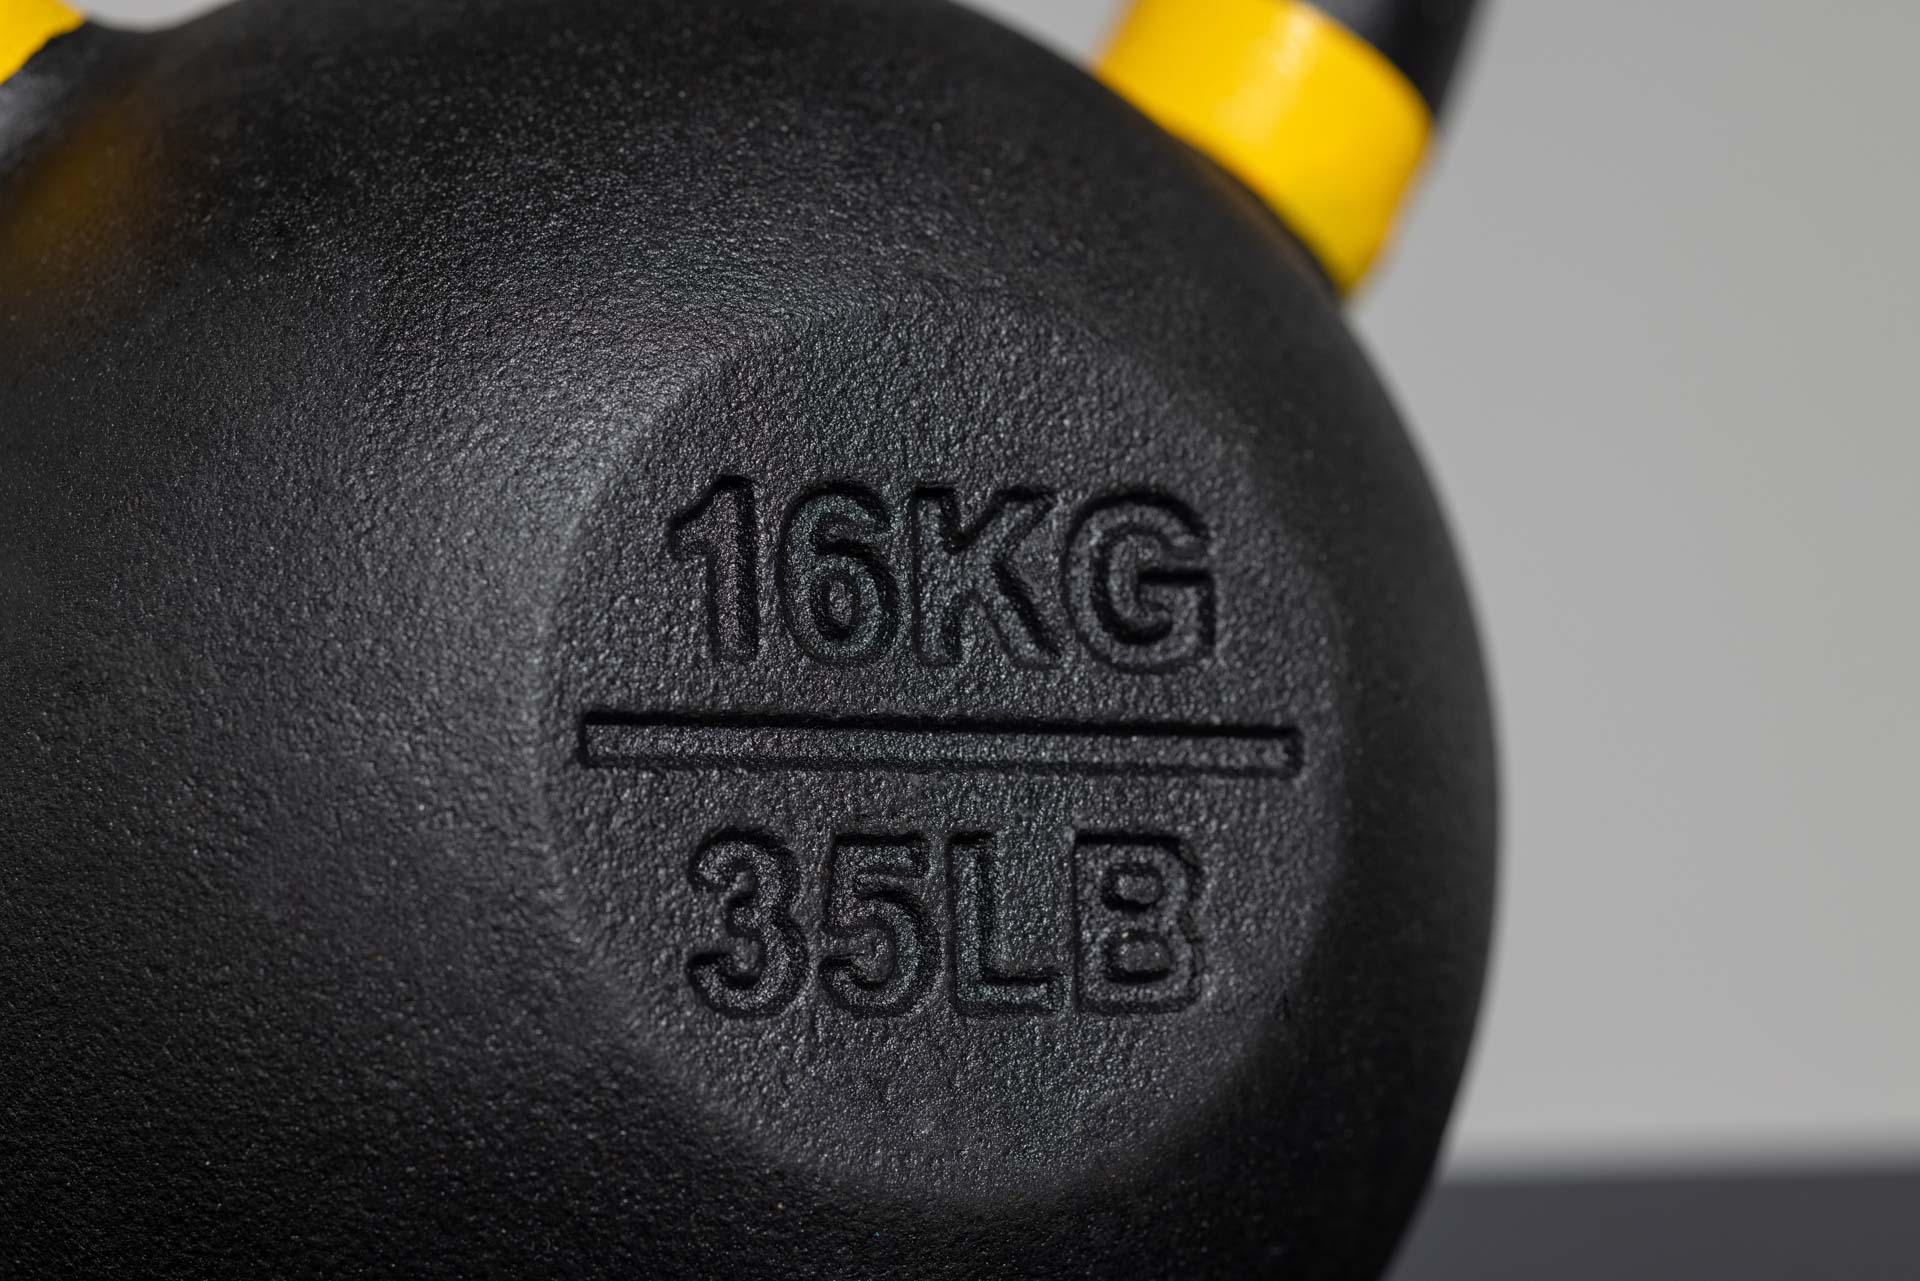 KB and LB markings on kettlebell